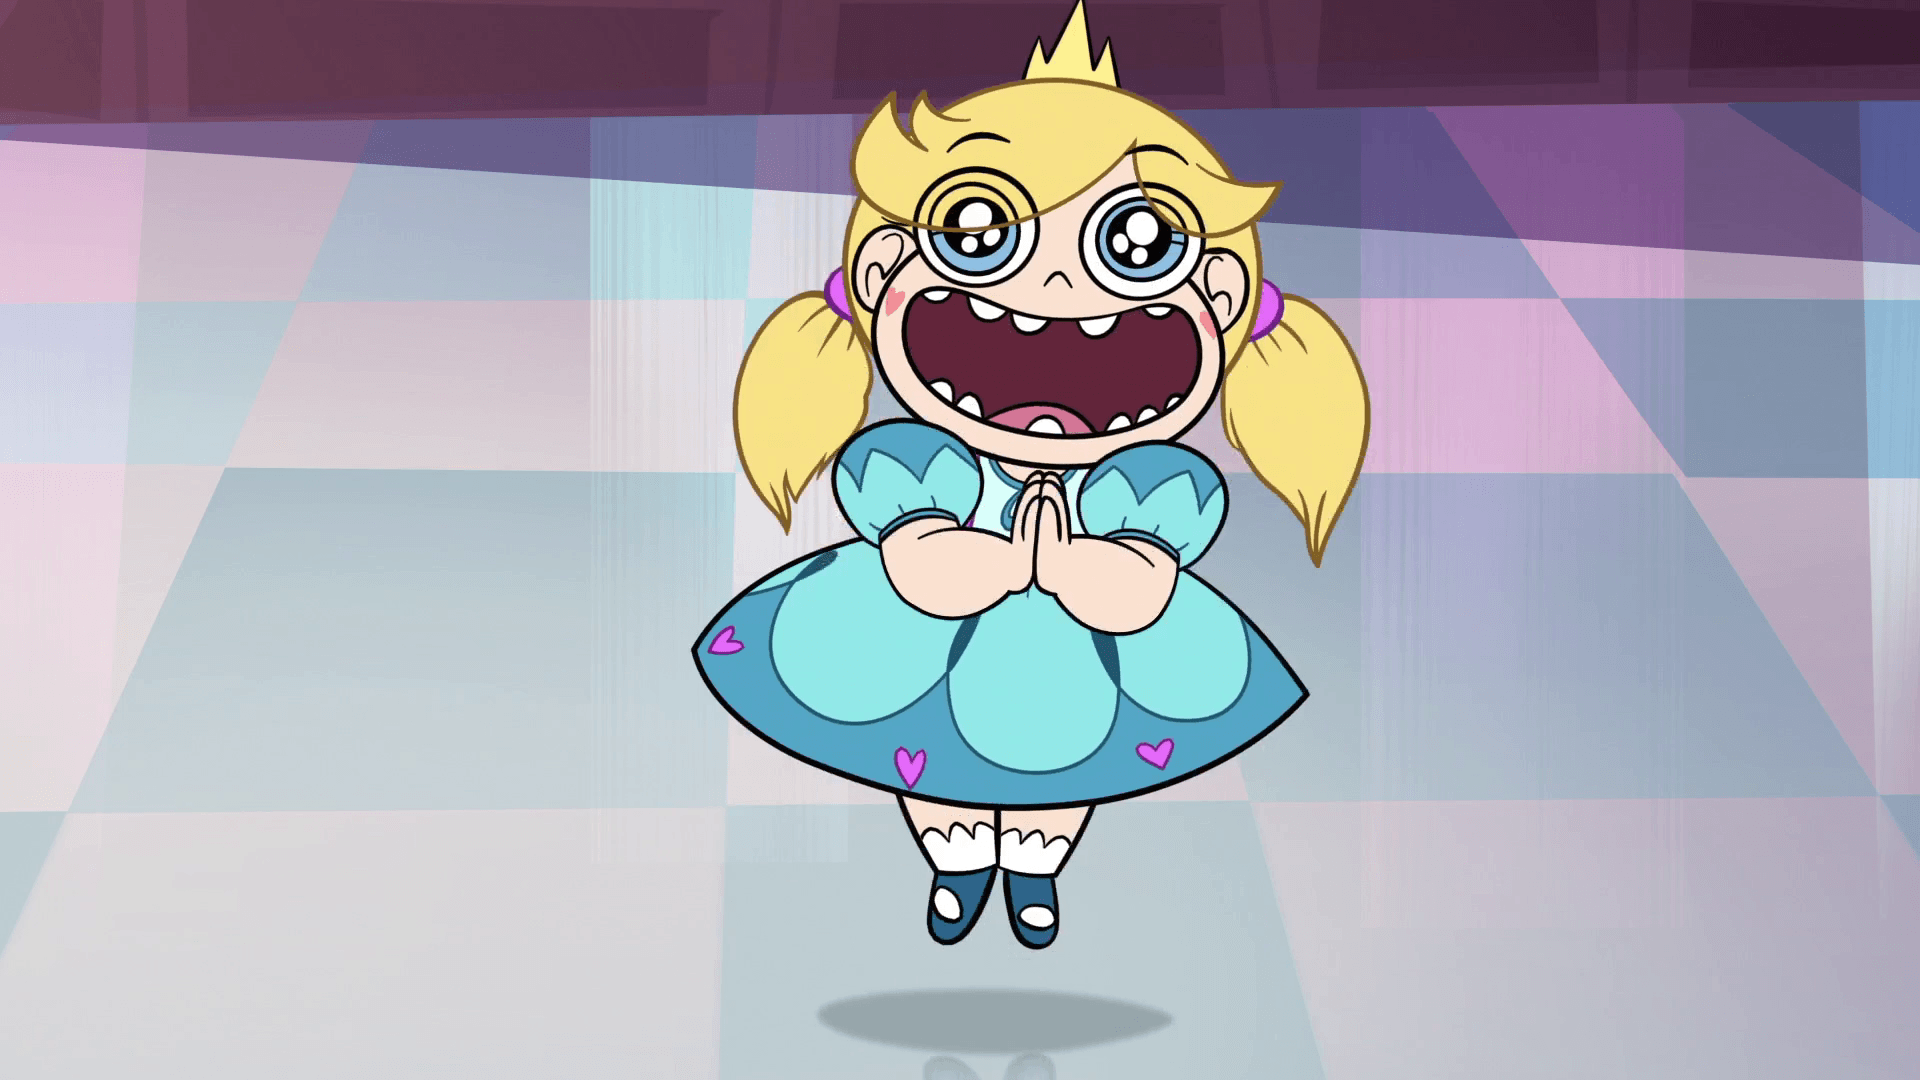 Star Butterfly Wallpapers